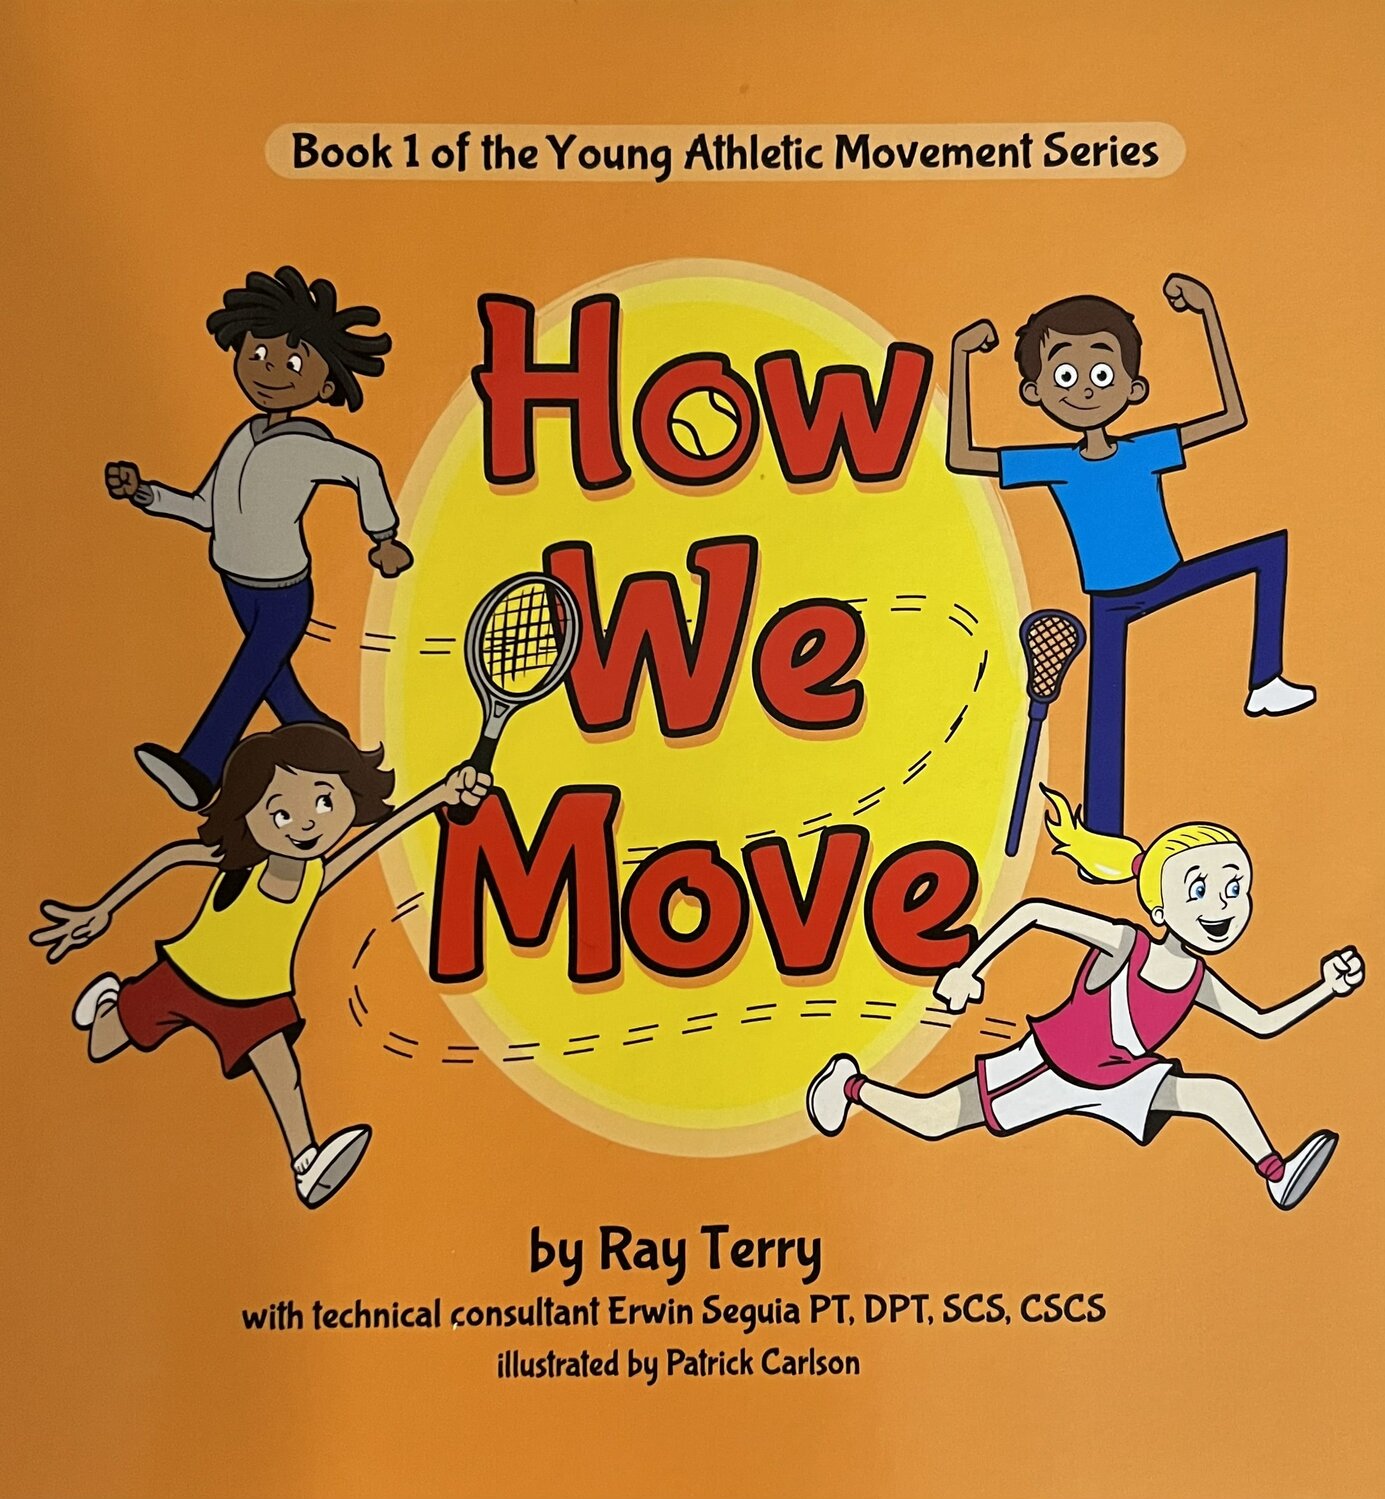 Ray Terry's new book series strives to improve children's strides.